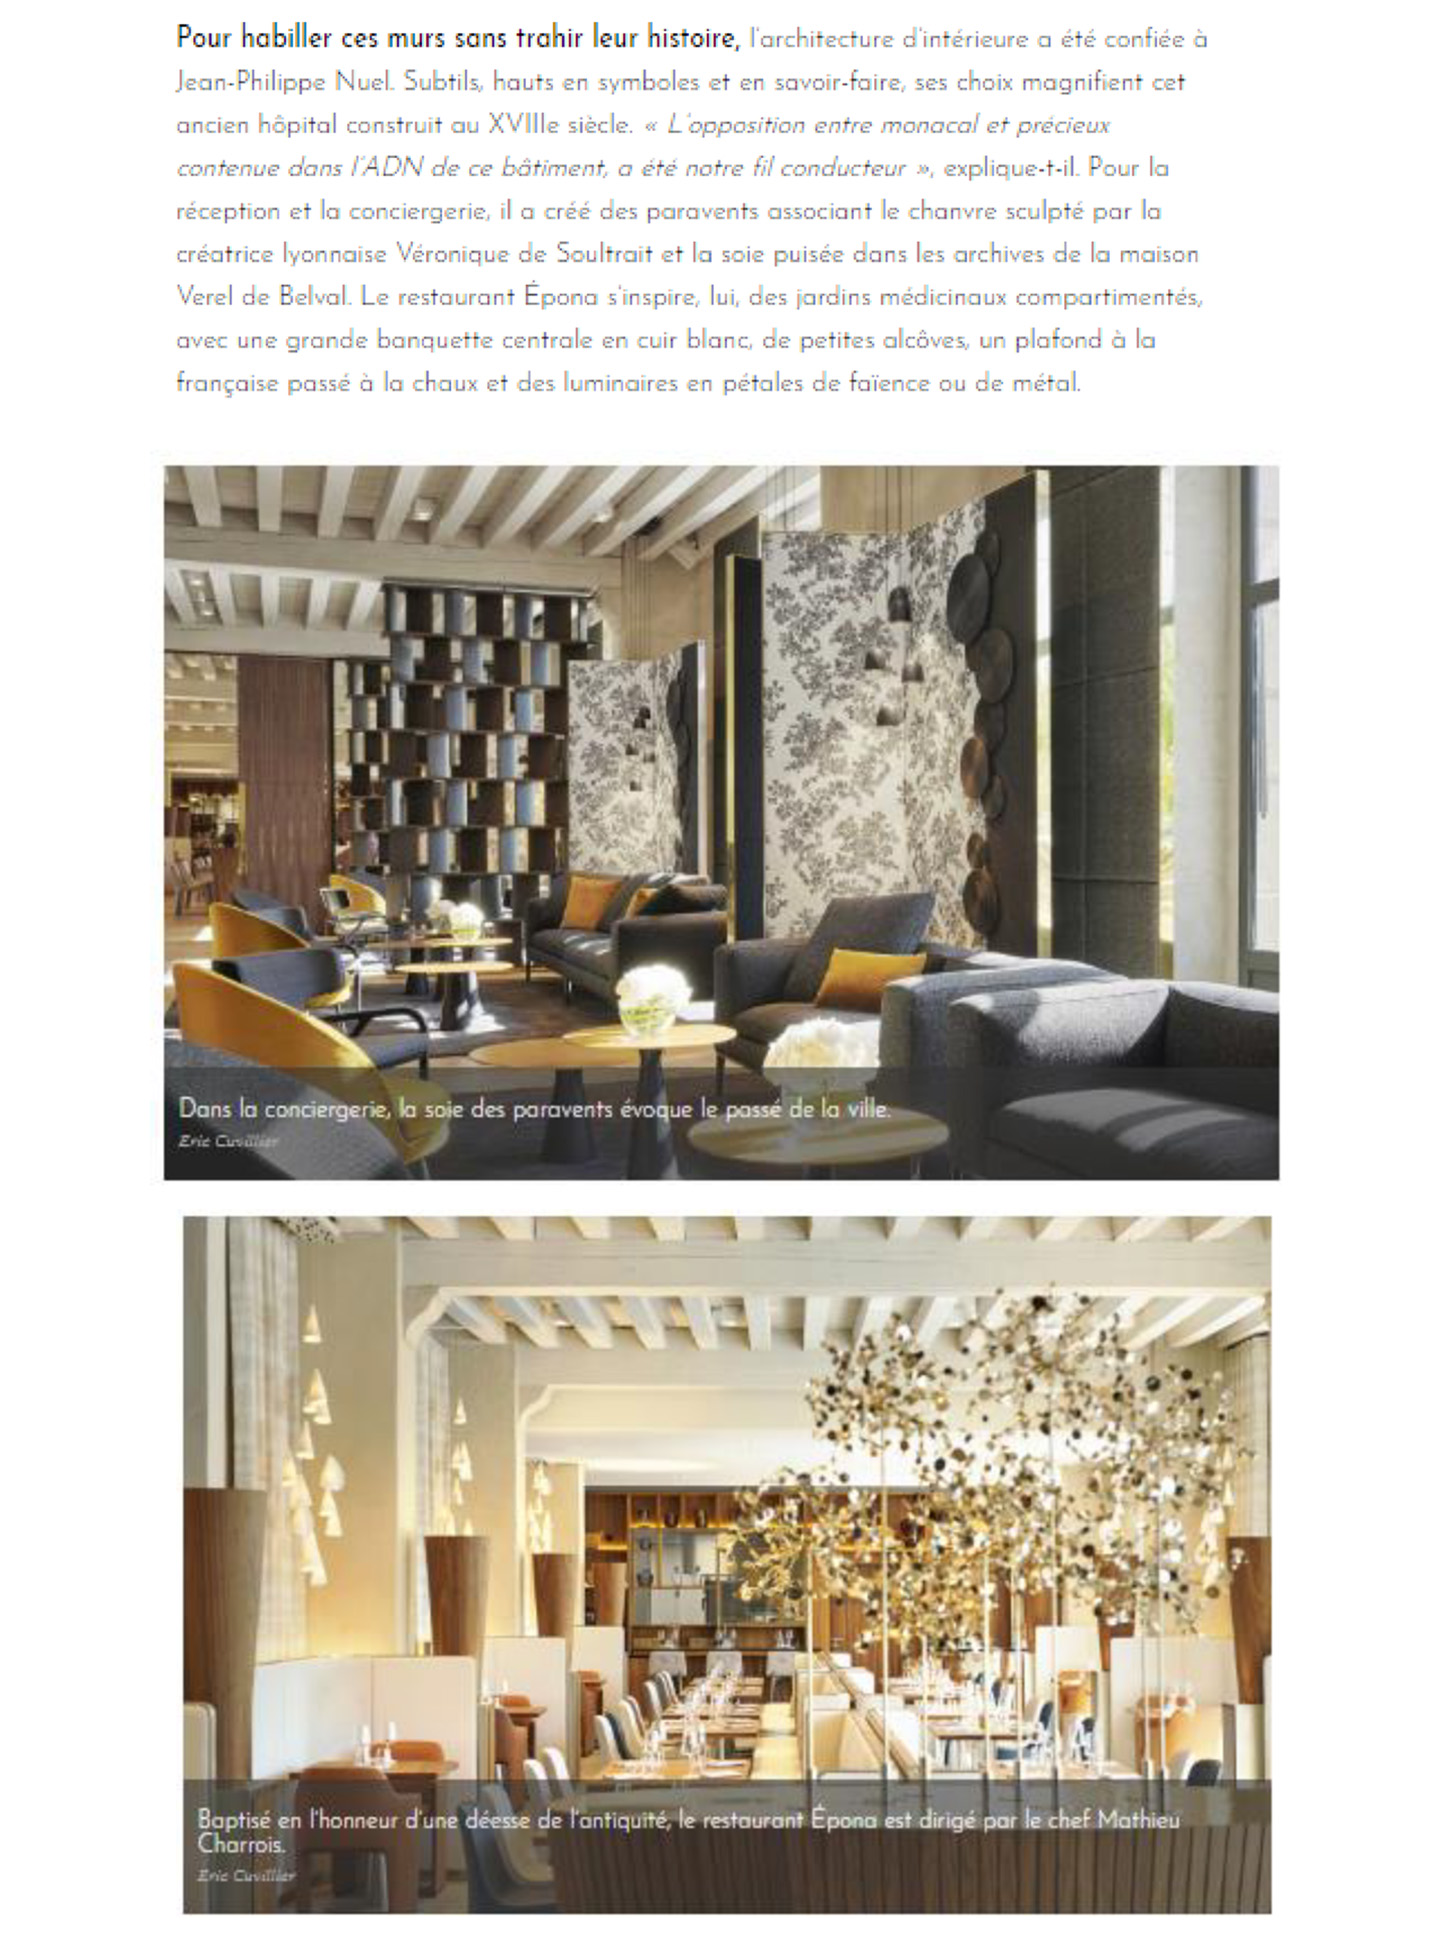 Article on the InterContinental Lyon hôtel dieu realized by the studio jean-Philippe Nuel in the magazine ideat, new luxury hotel, luxury interior design, rehabilitated historical center